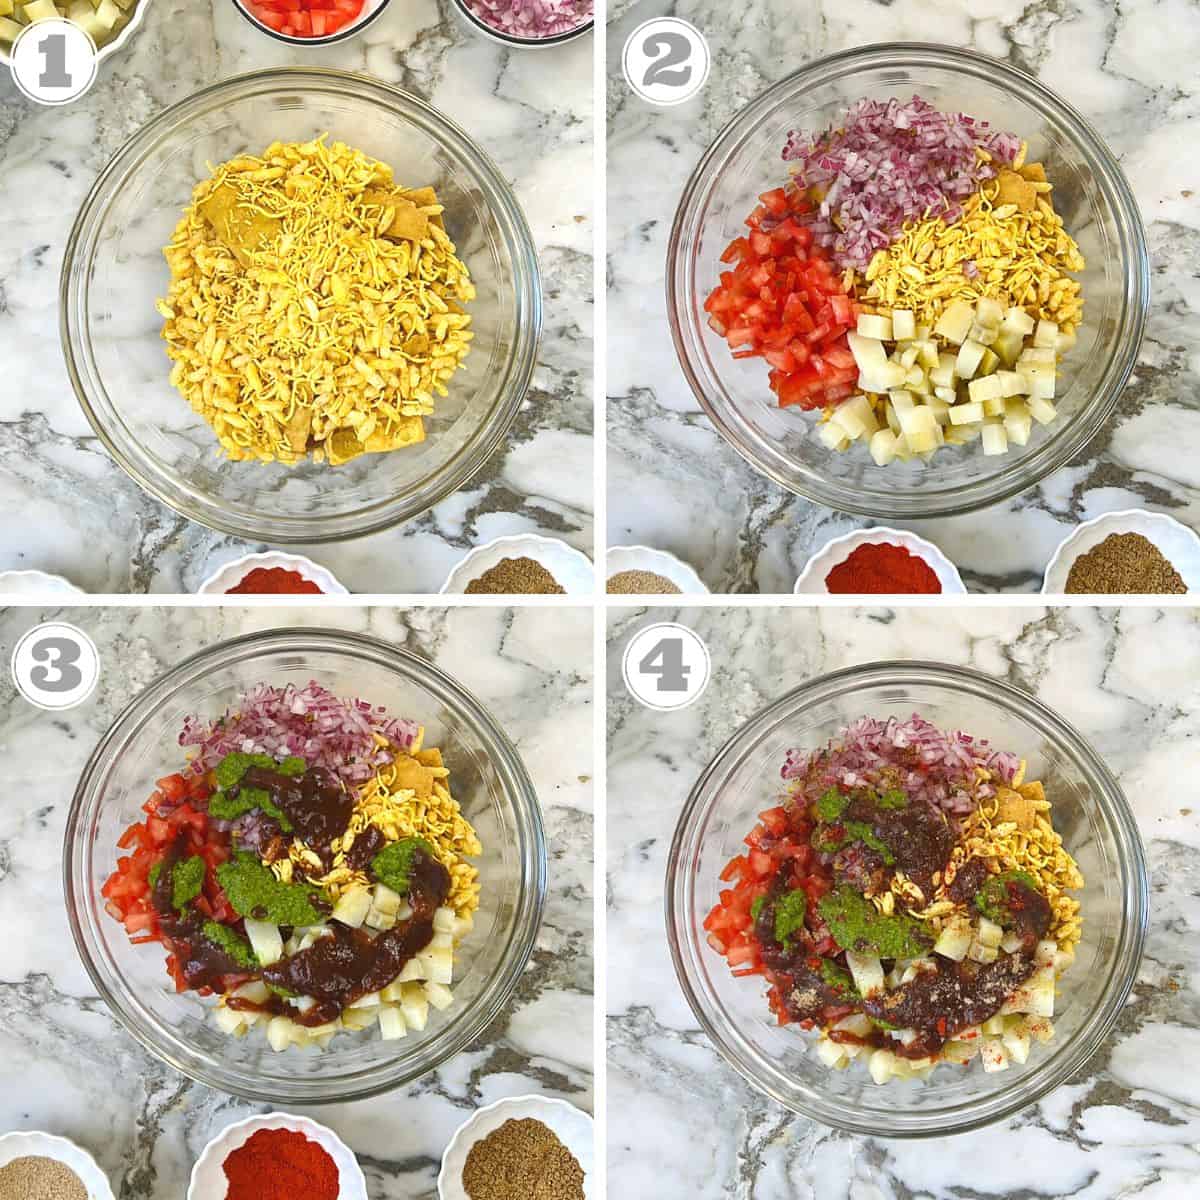 photos one through four showing how to make bhel 